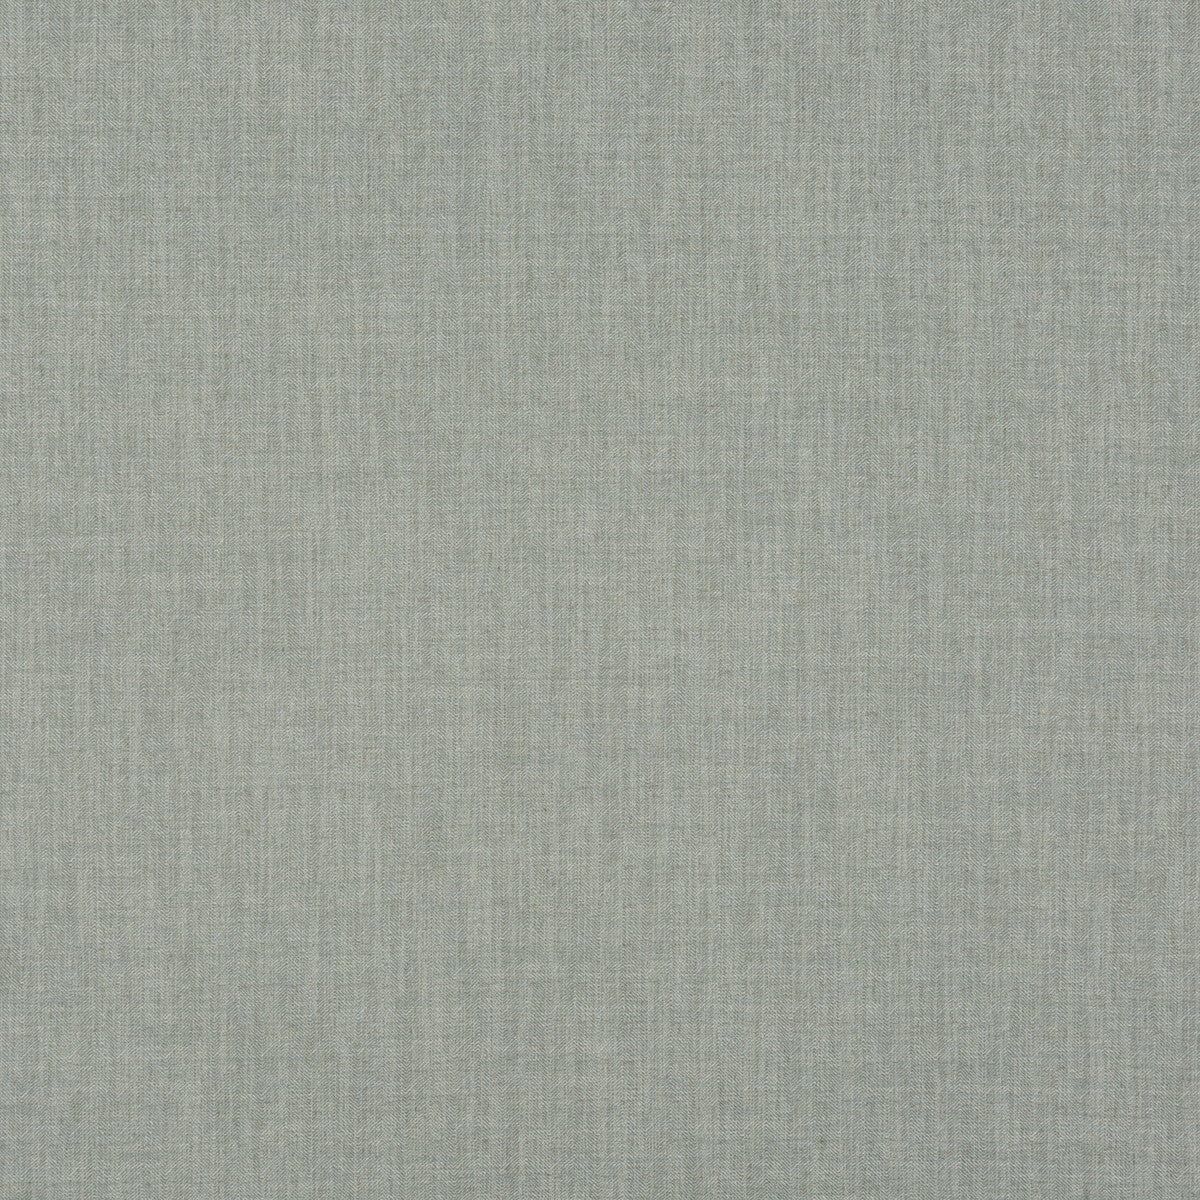 Canyon fabric in sea foam color - pattern BF10680.721.0 - by G P &amp; J Baker in the Essential Colours collection